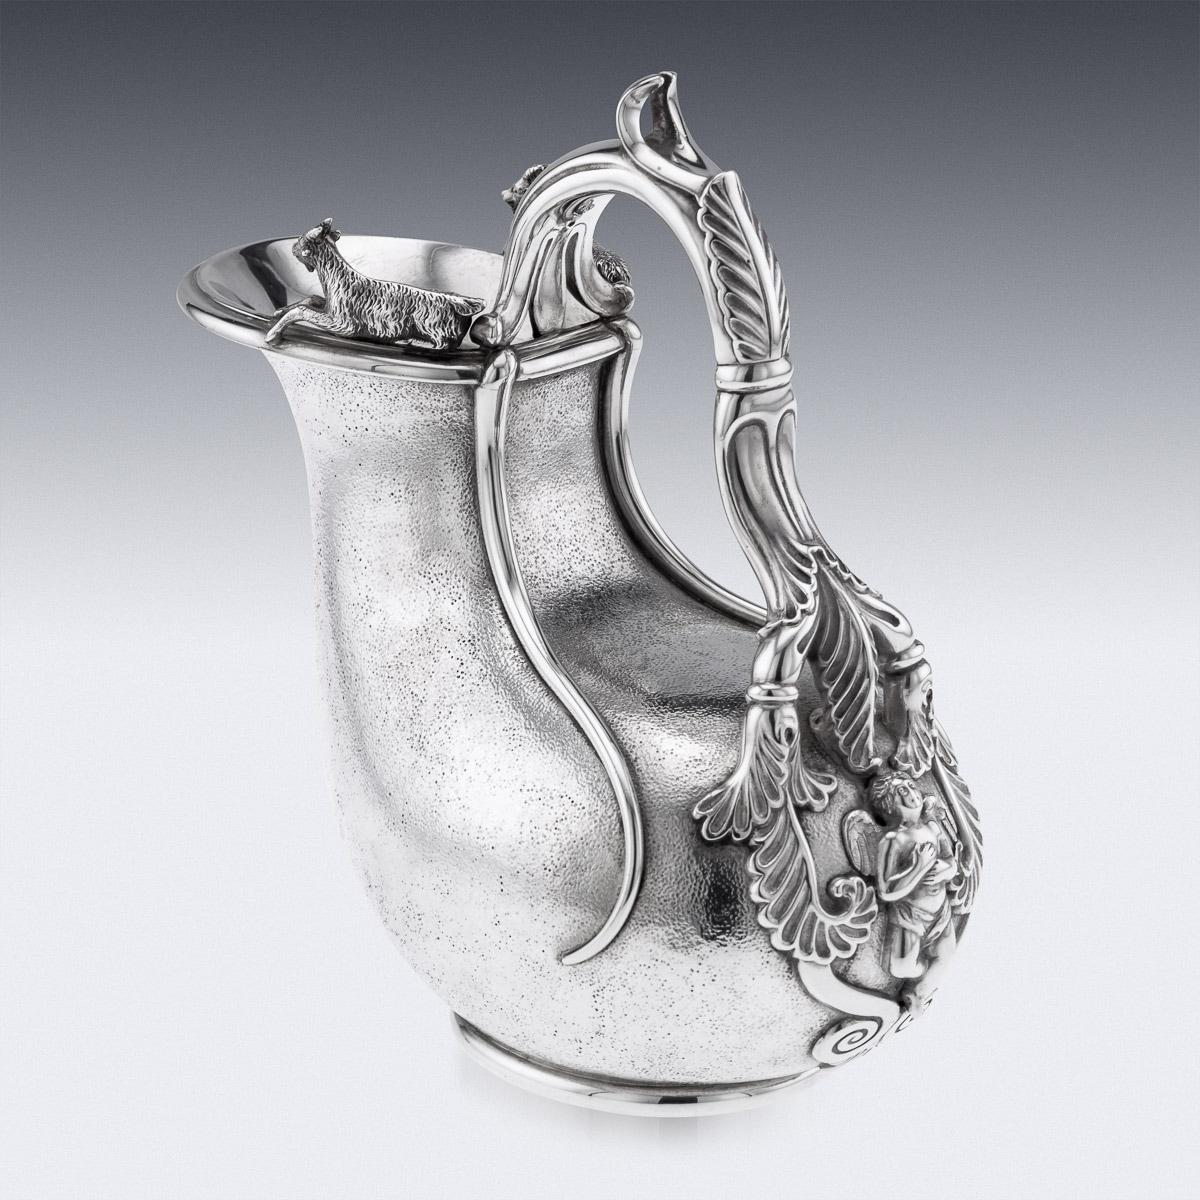 20th Century Edwardian silver Askos jug, applied with an openwork acanthus-capped handle with putto terminal on matted ground, the rim applied with two fully-modeled rams, inside richly parcel gilt.
Hallmarked English silver, London, year 1905 (k),